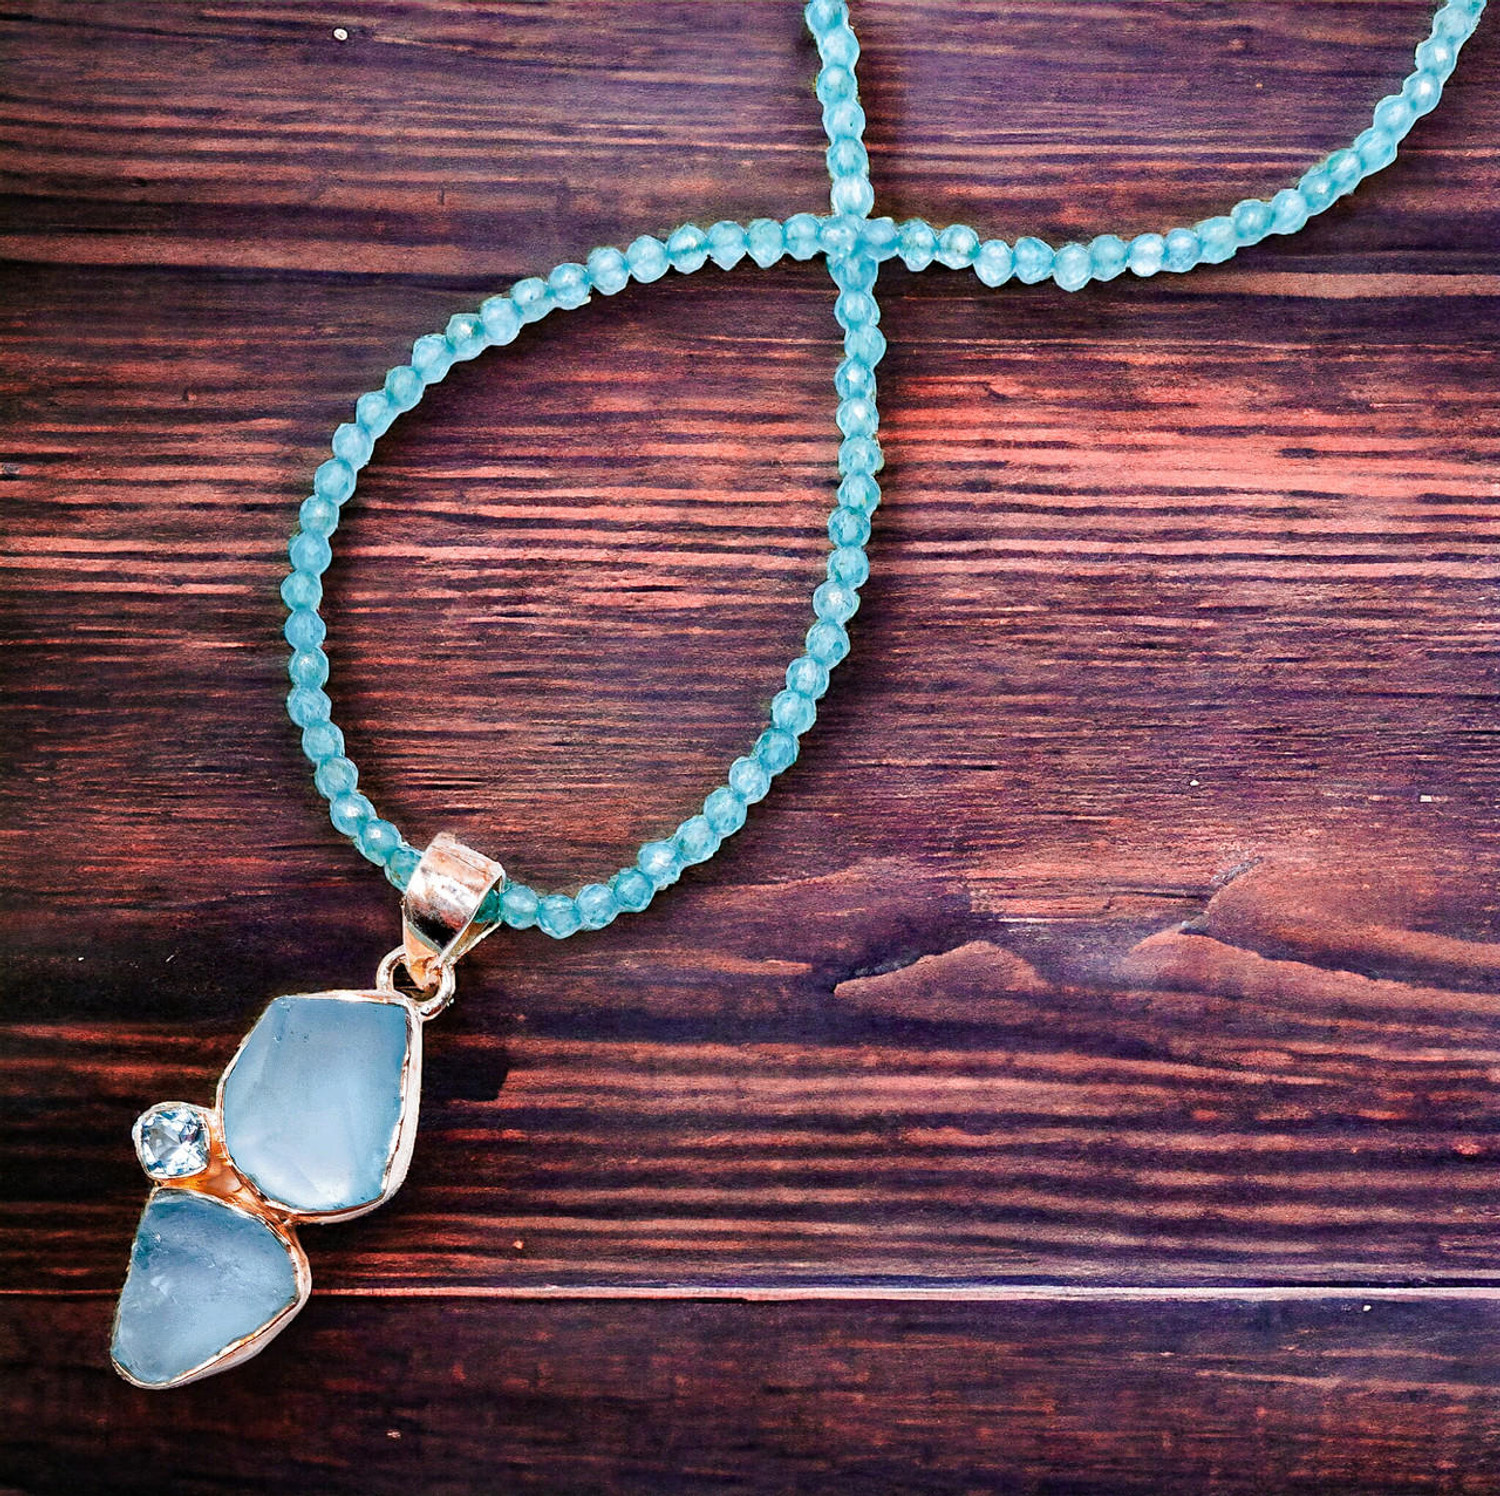 Light blue gemstone pendant necklace with white pearl strand 17 inch